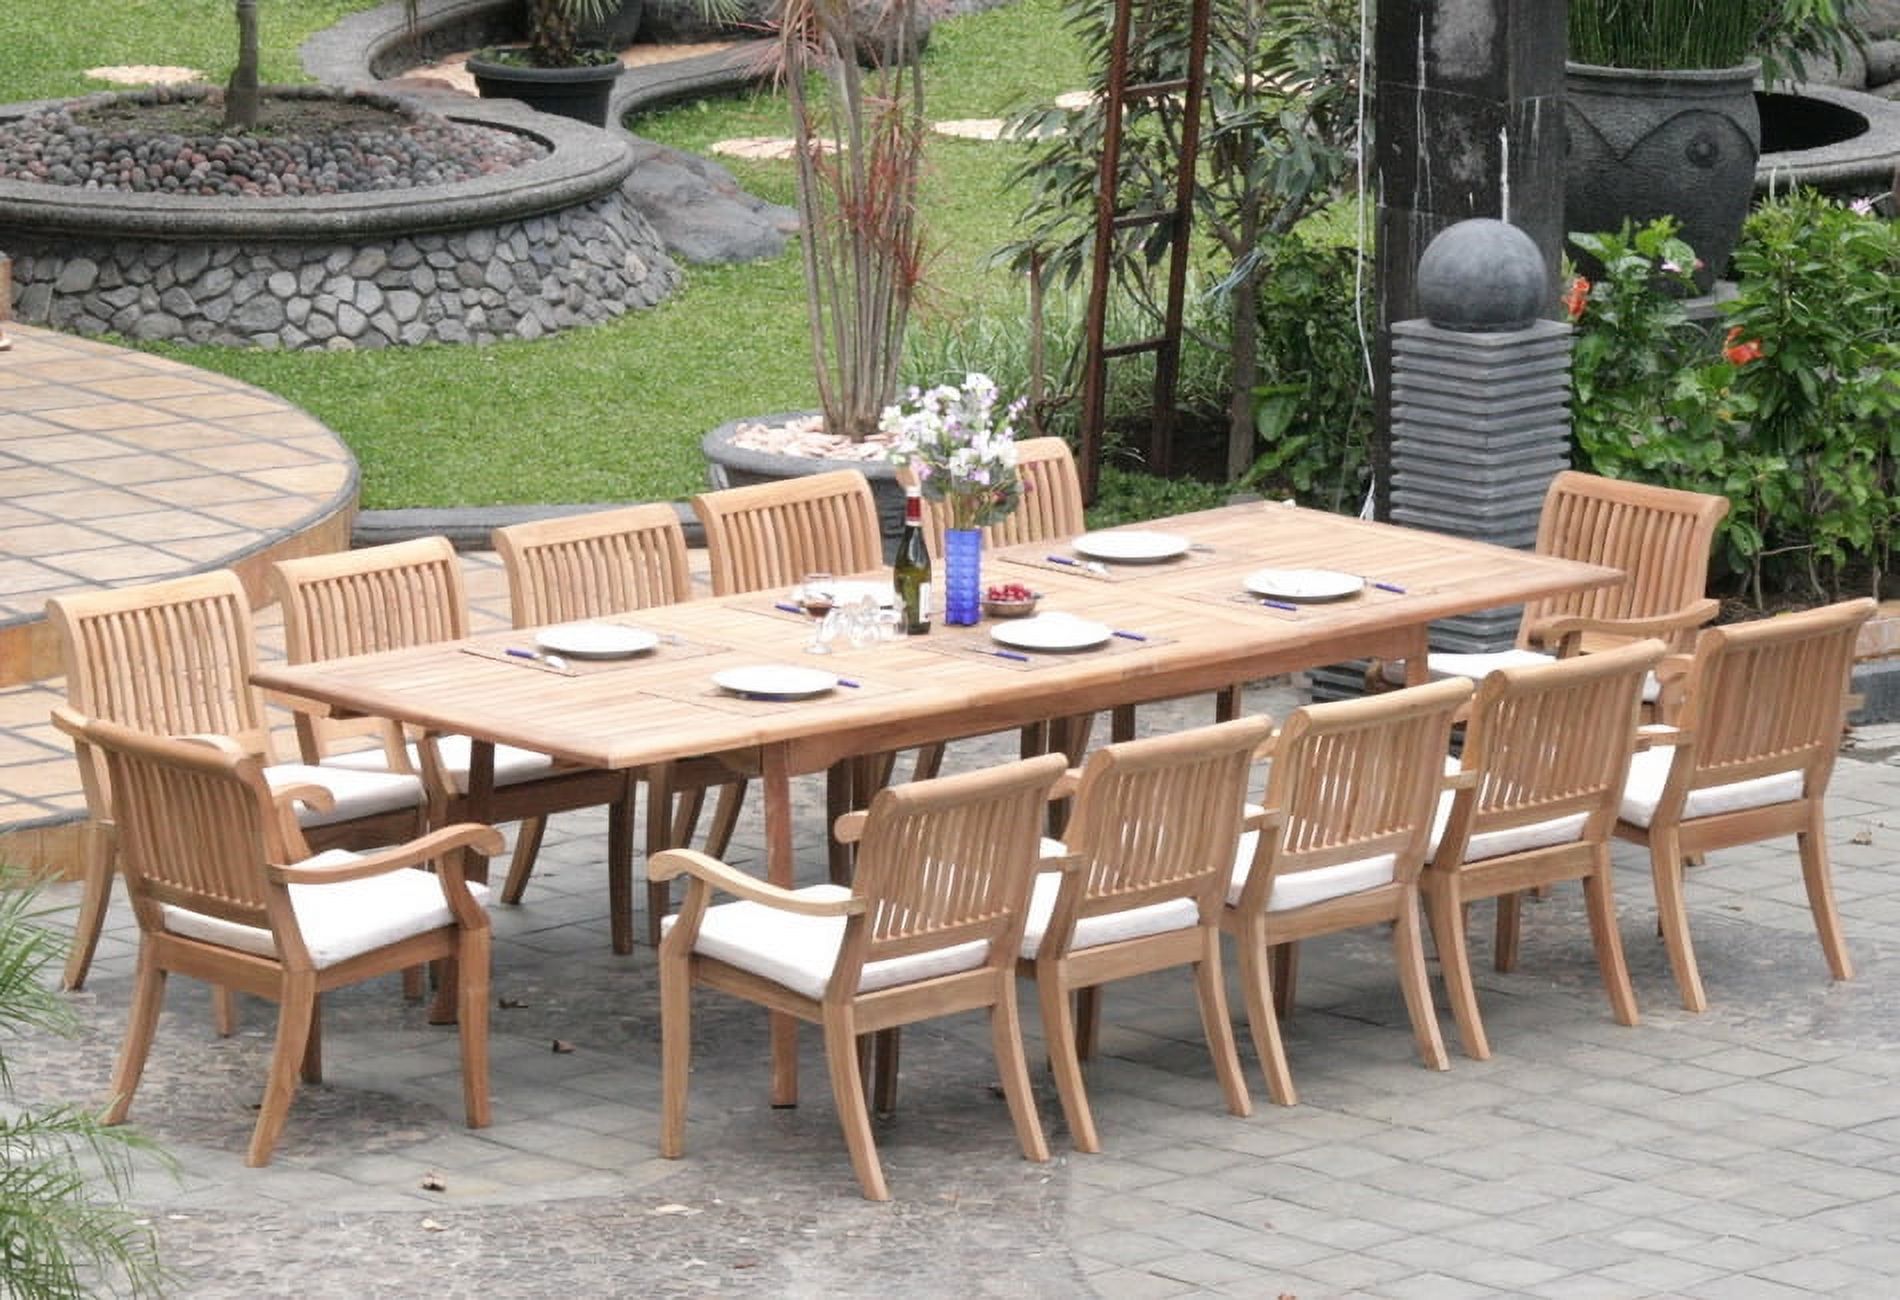 Teak Dining Set:12 Seater 13 Pc - Very Large Atnas 118" Premium Dining Table and 12 Arbor Stacking Arm Chairs Outdoor Patio Grade-A Teak Wood WholesaleTeak #WMDSABl - image 1 of 3